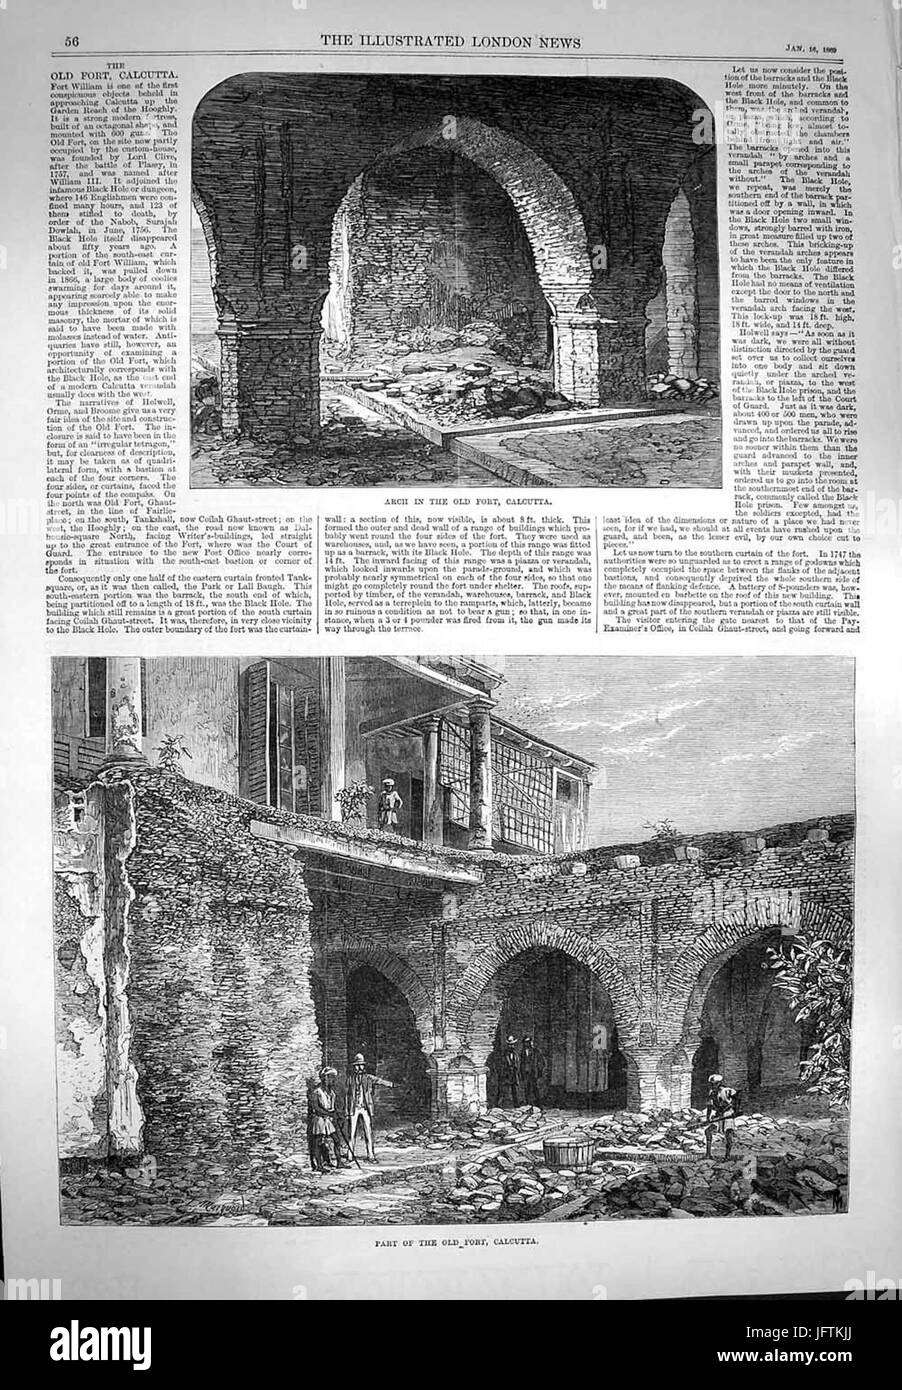 Part of the old Fort, Calcutta,  from the Illustrated London News, 1869 Stock Photo